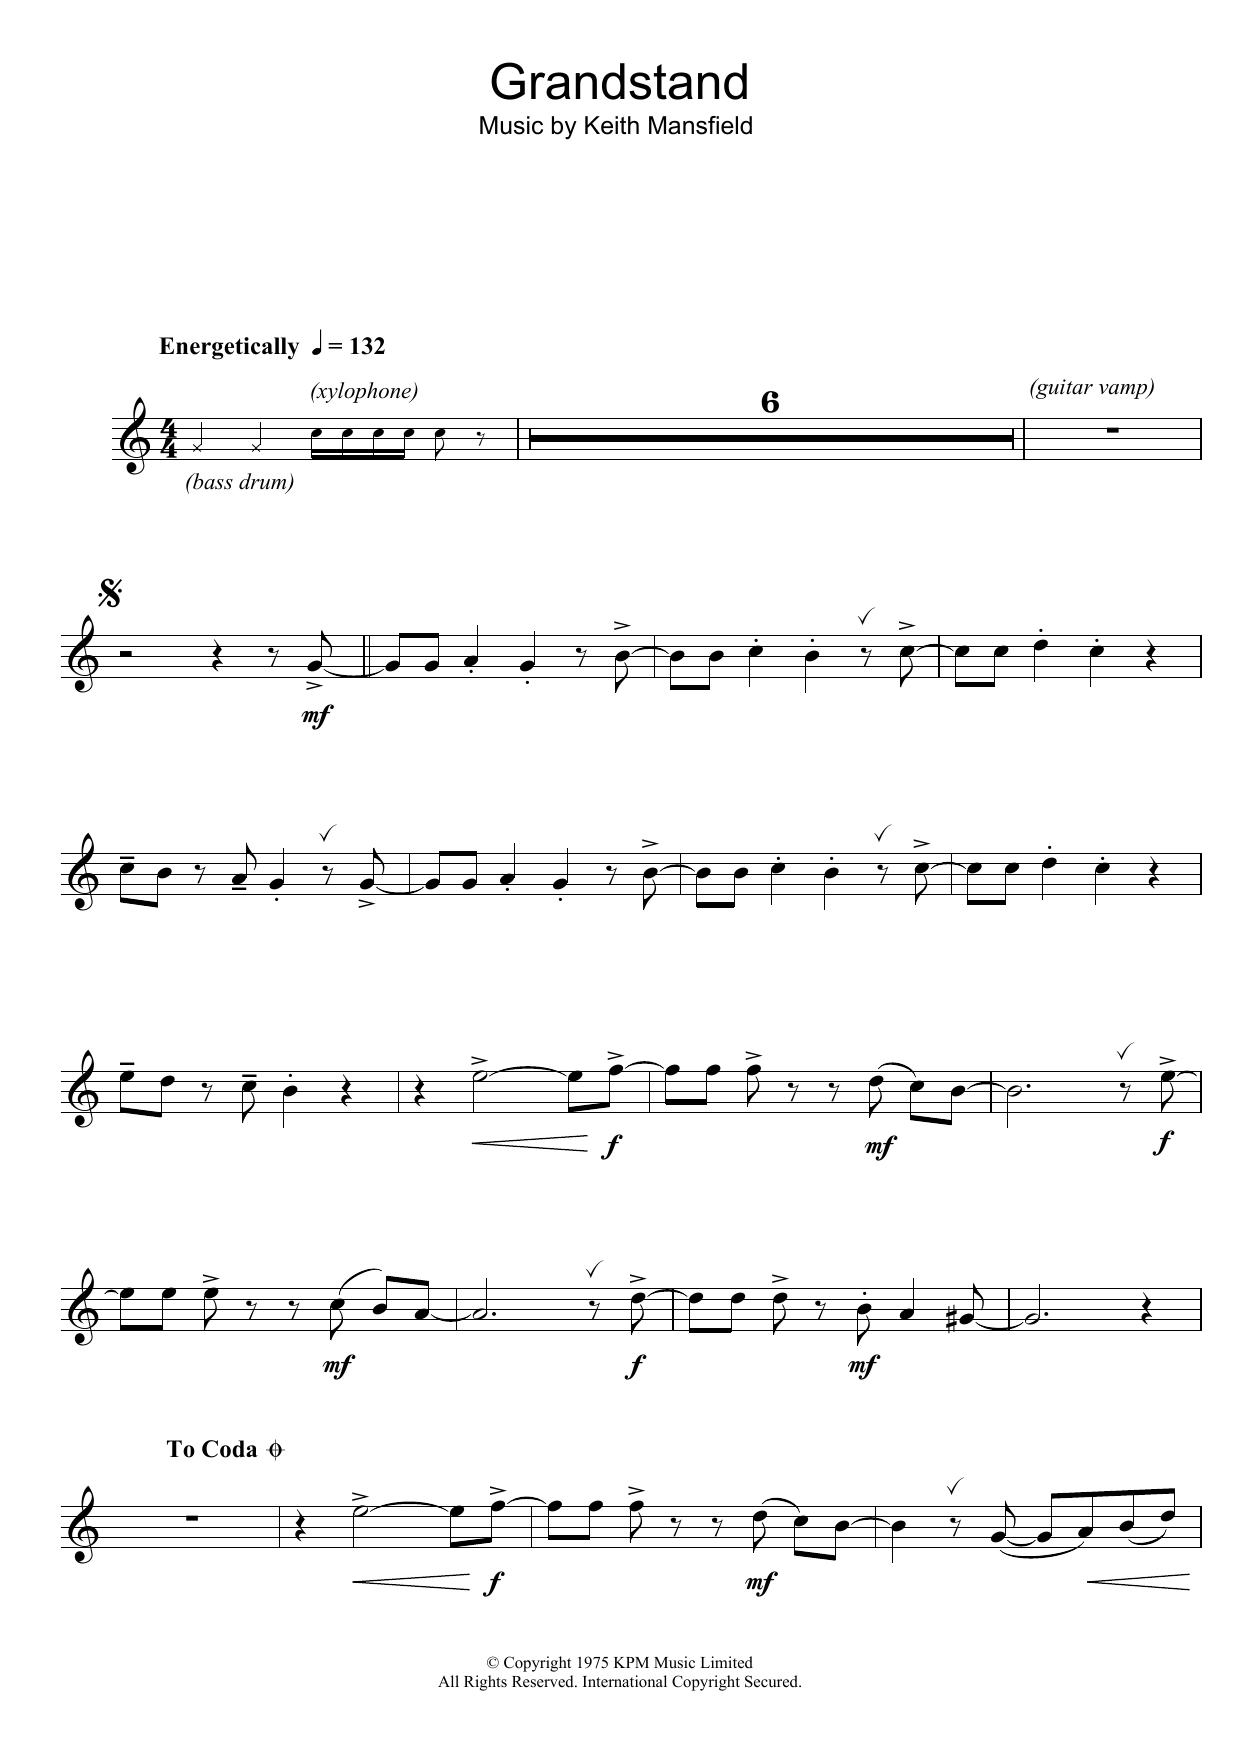 Download Keith Mansfield Theme from Grandstand Sheet Music